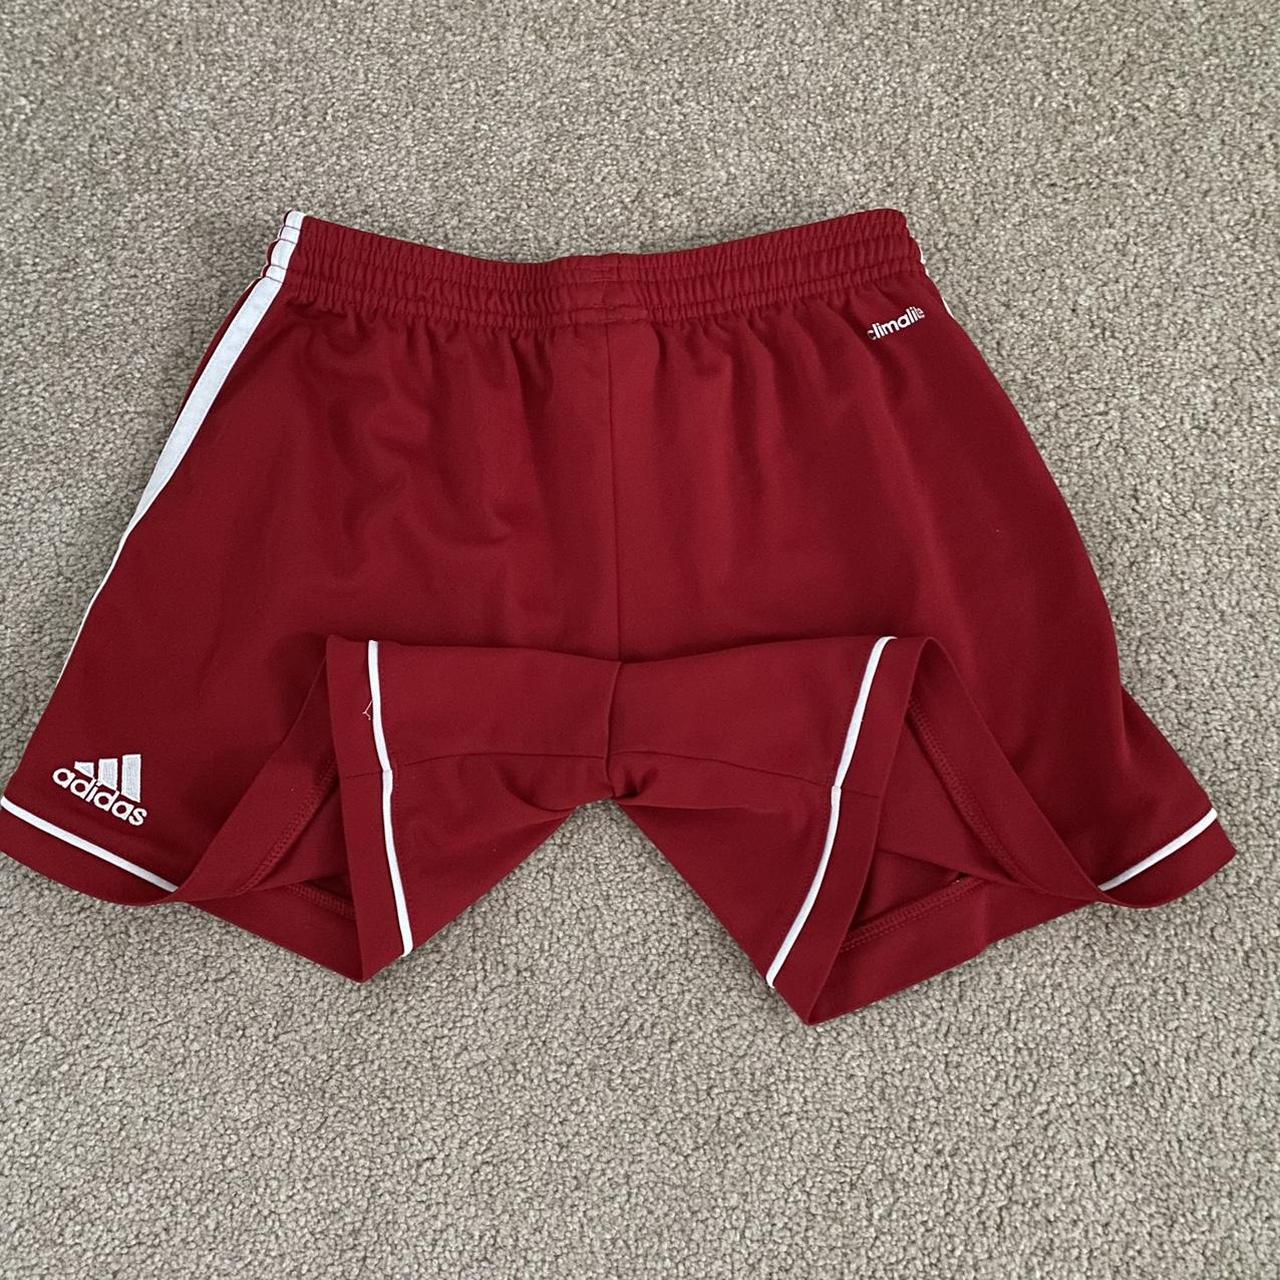 Adidas Women's Red Shorts (2)